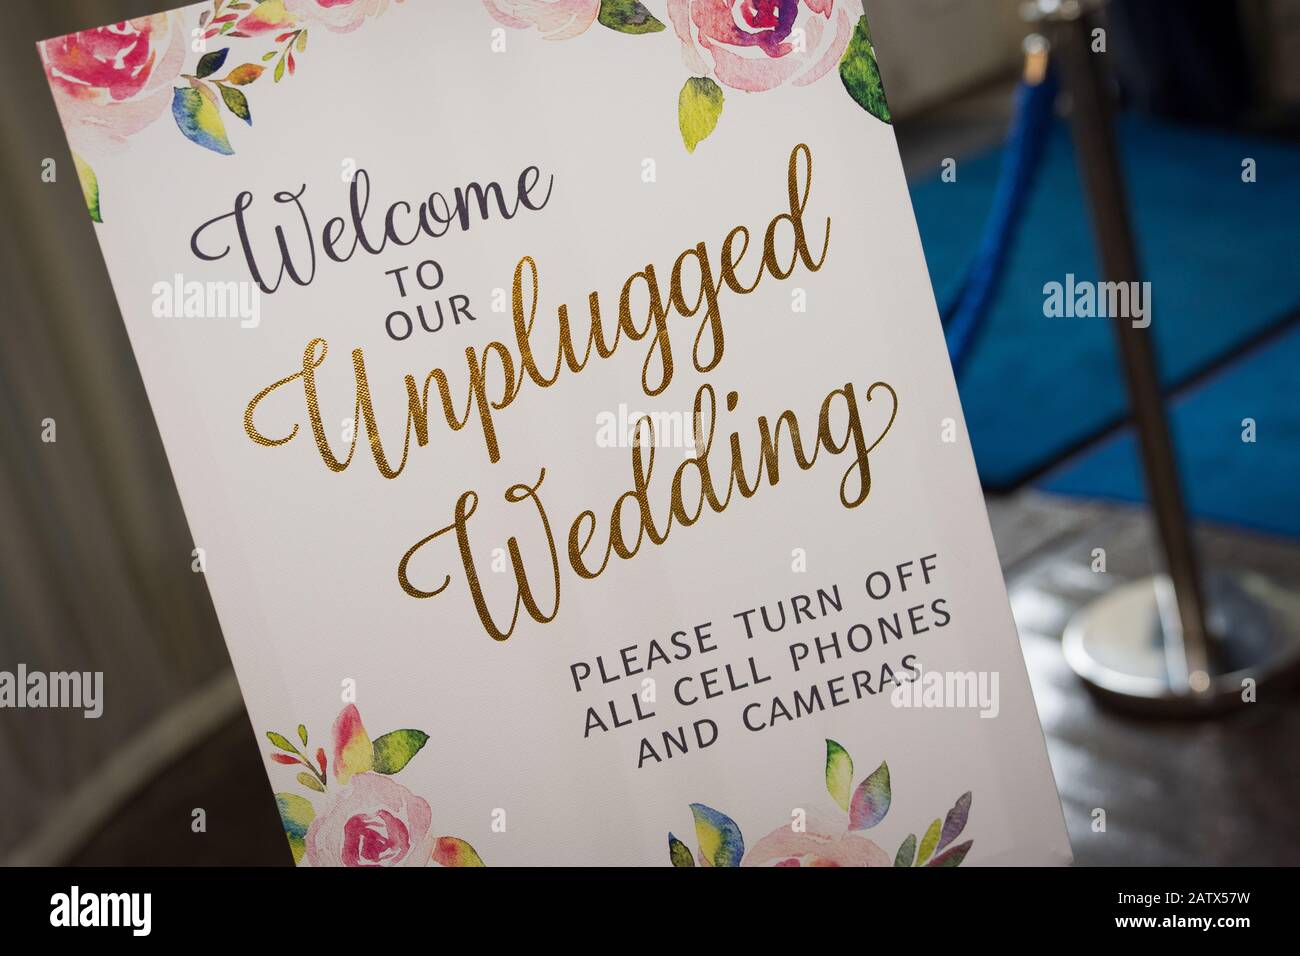 Unplugged Wedding No Photos Please sign. Wedding Photographer Media Announcement Request Stock Photo